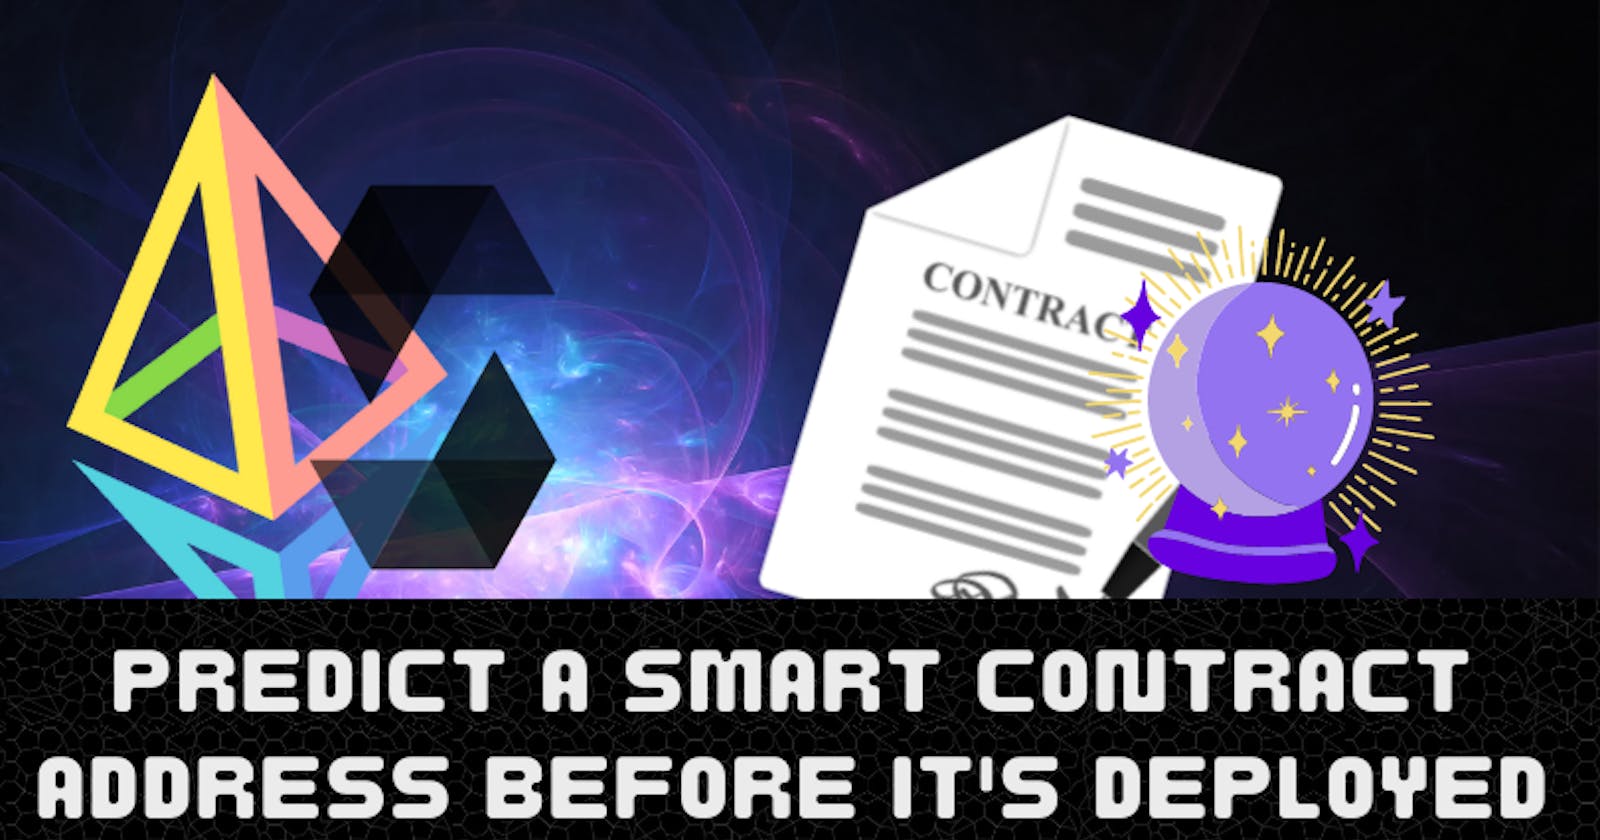 Predict a smart contract address before it's deployed.